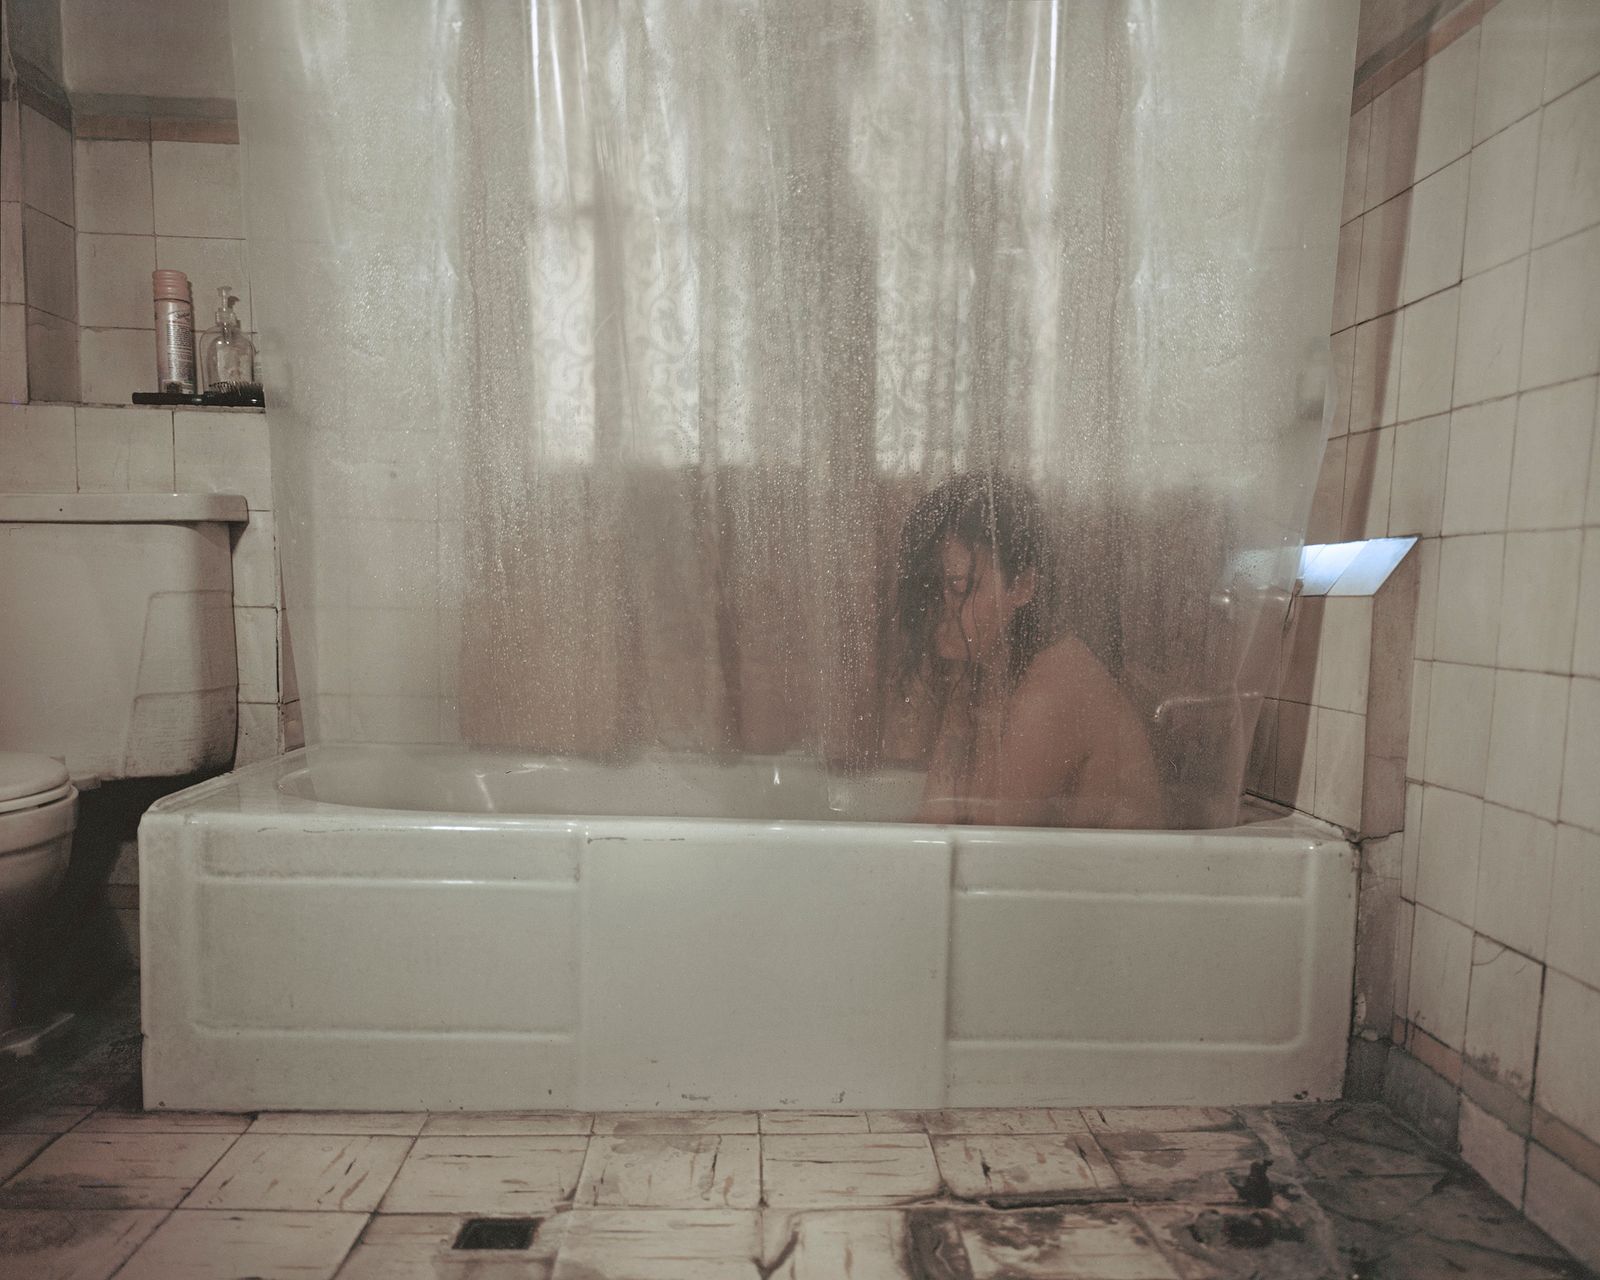 © Paola Paredes - Image from the Until You Change photography project